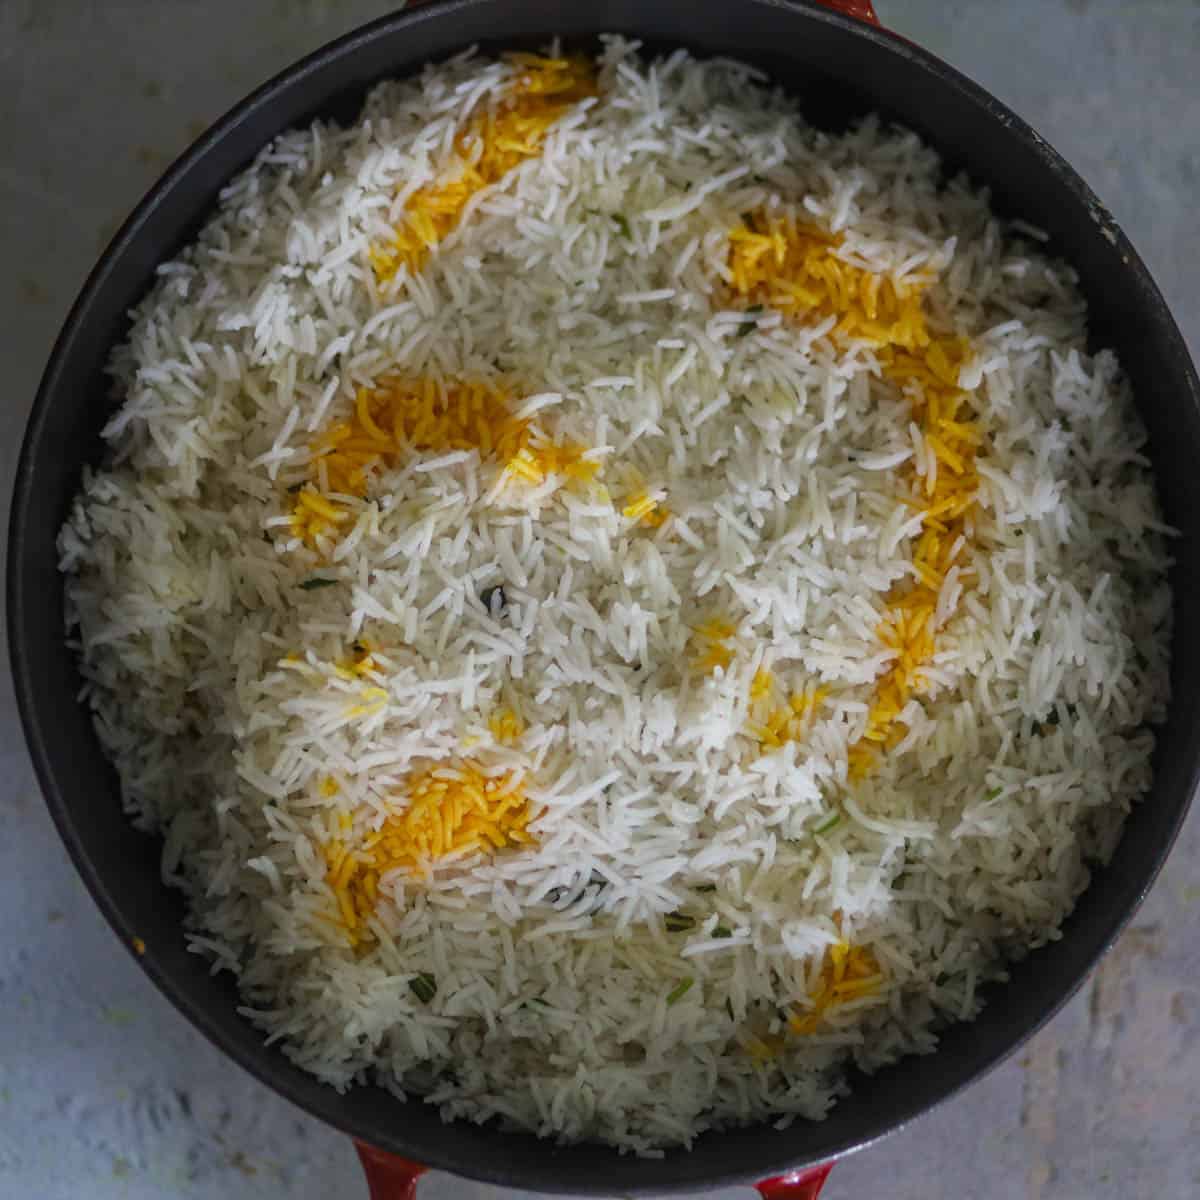 Top it with partially cook rice and top it with saffron milk and rose water.